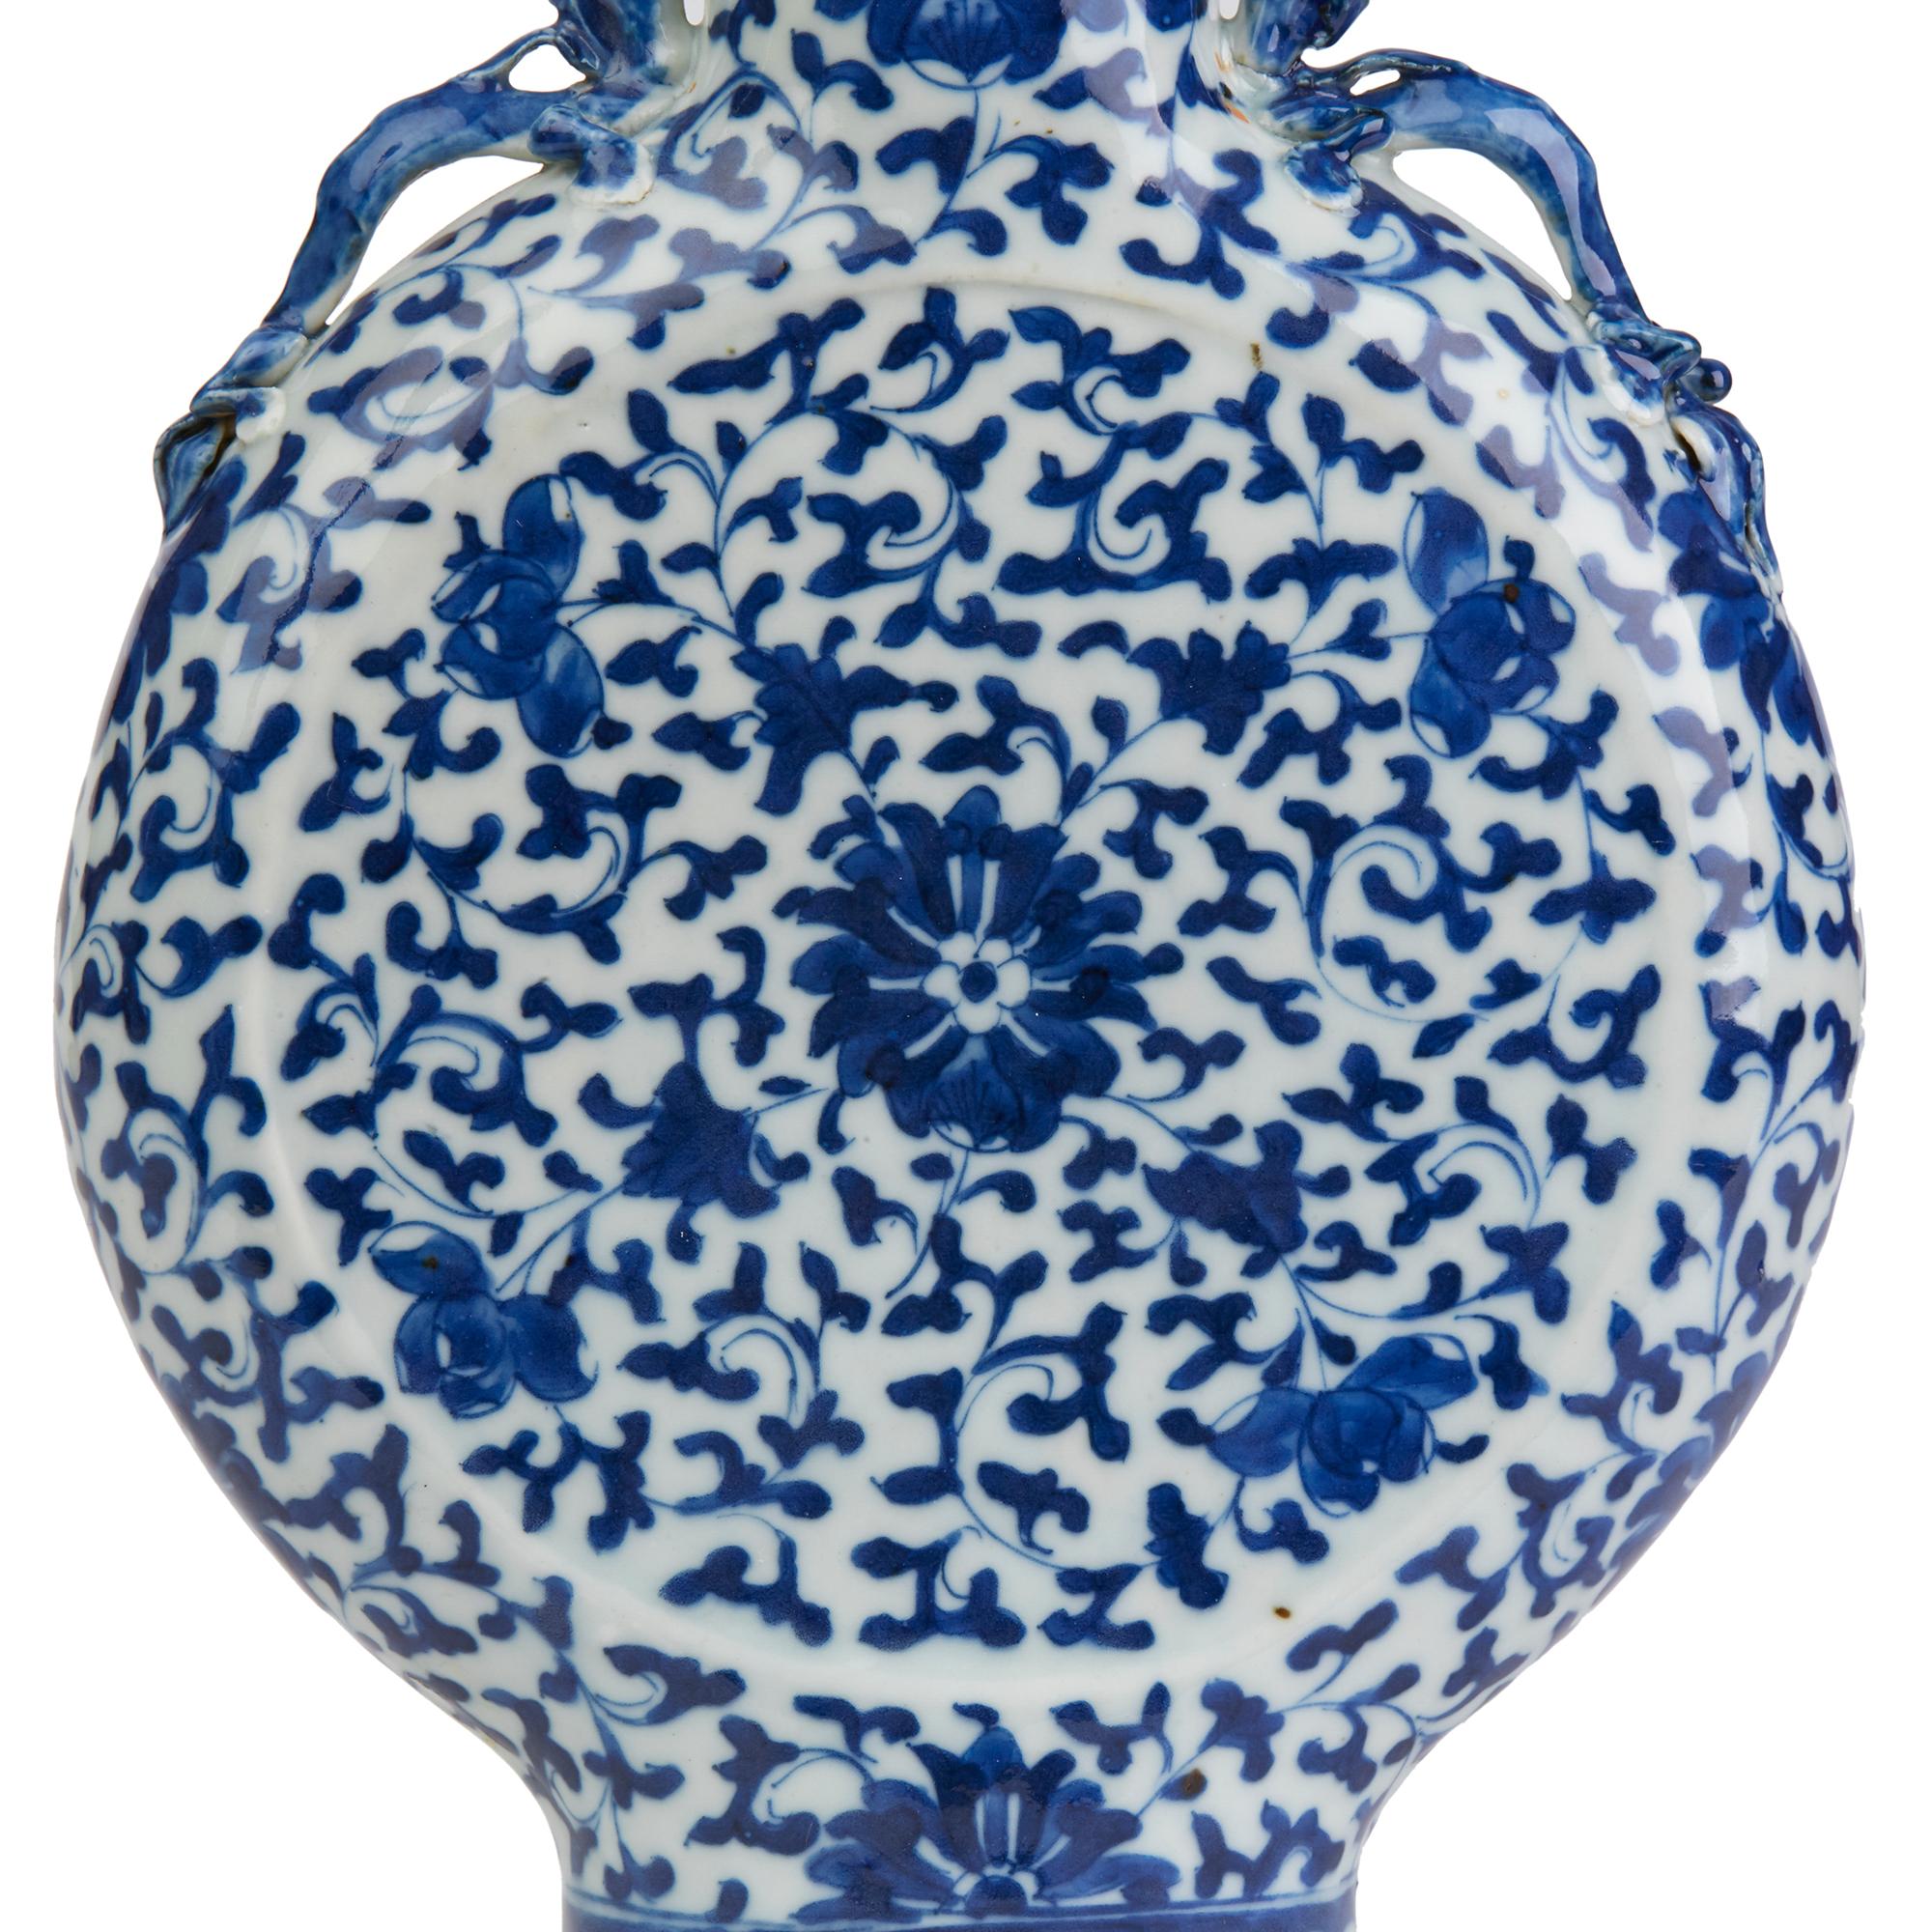 Chinese Qing Dynasty Blue and White Moon Shaped Porcelain Vase, 19th Century 6